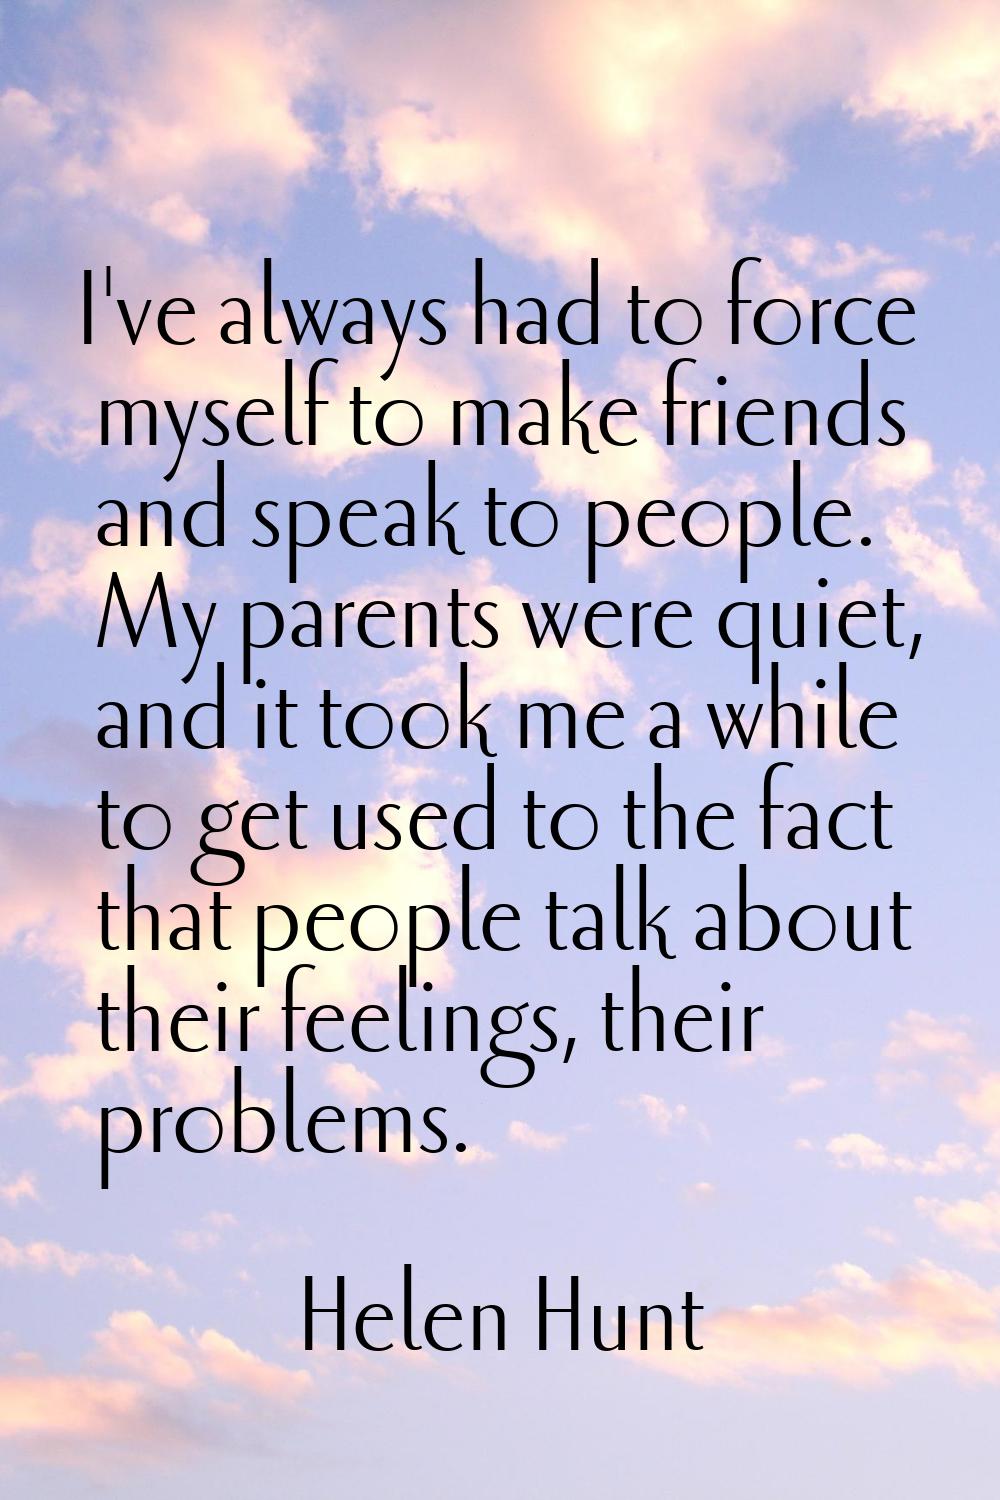 I've always had to force myself to make friends and speak to people. My parents were quiet, and it 